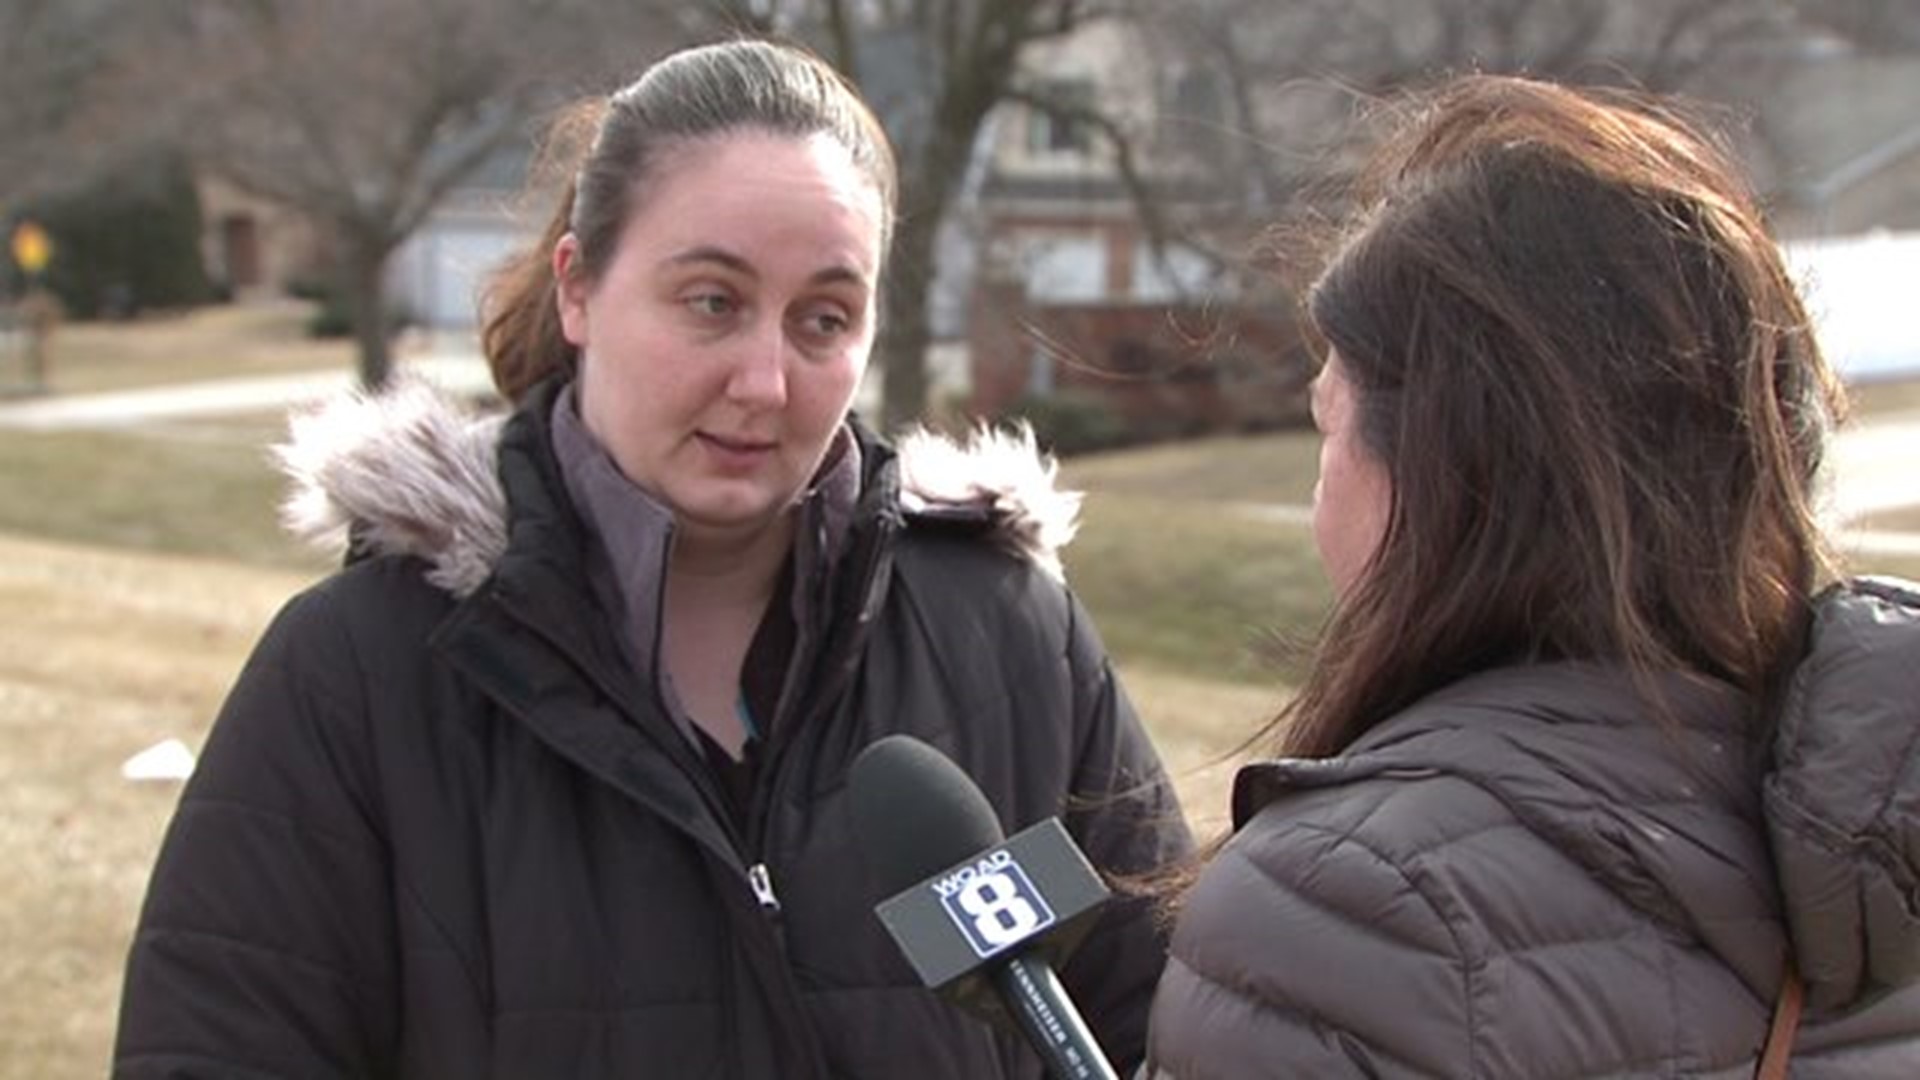 Neighbor recalls conversation with alleged kidnapper about property privacy